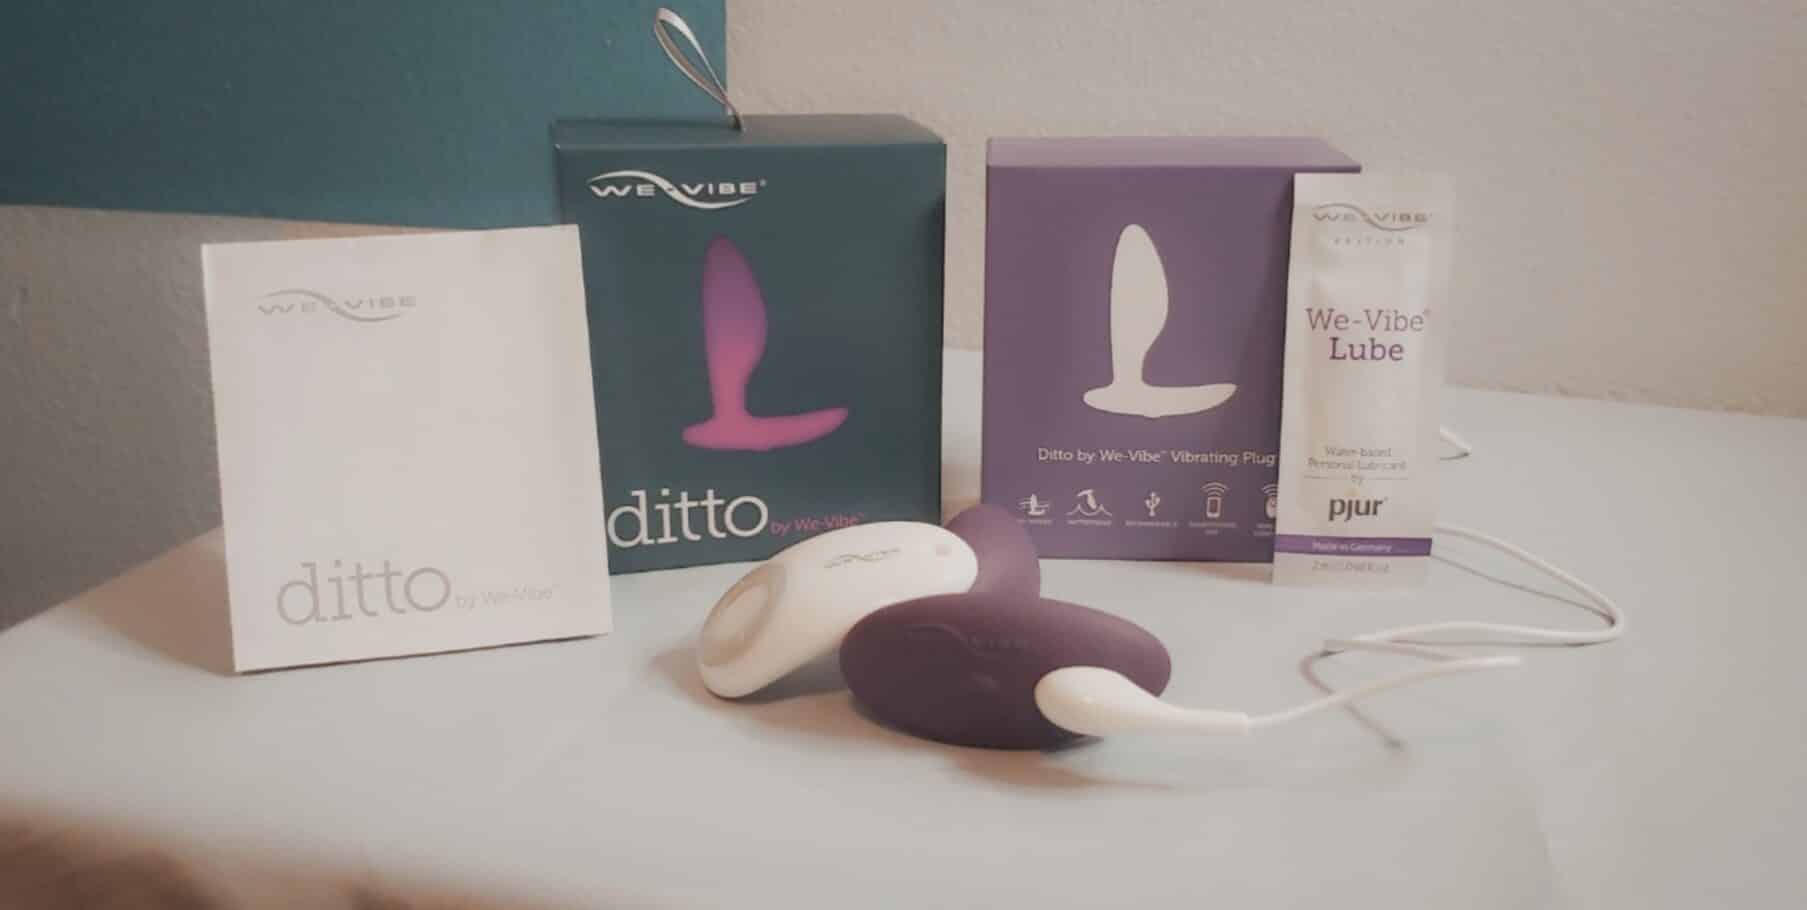 We-Vibe Ditto Packaging